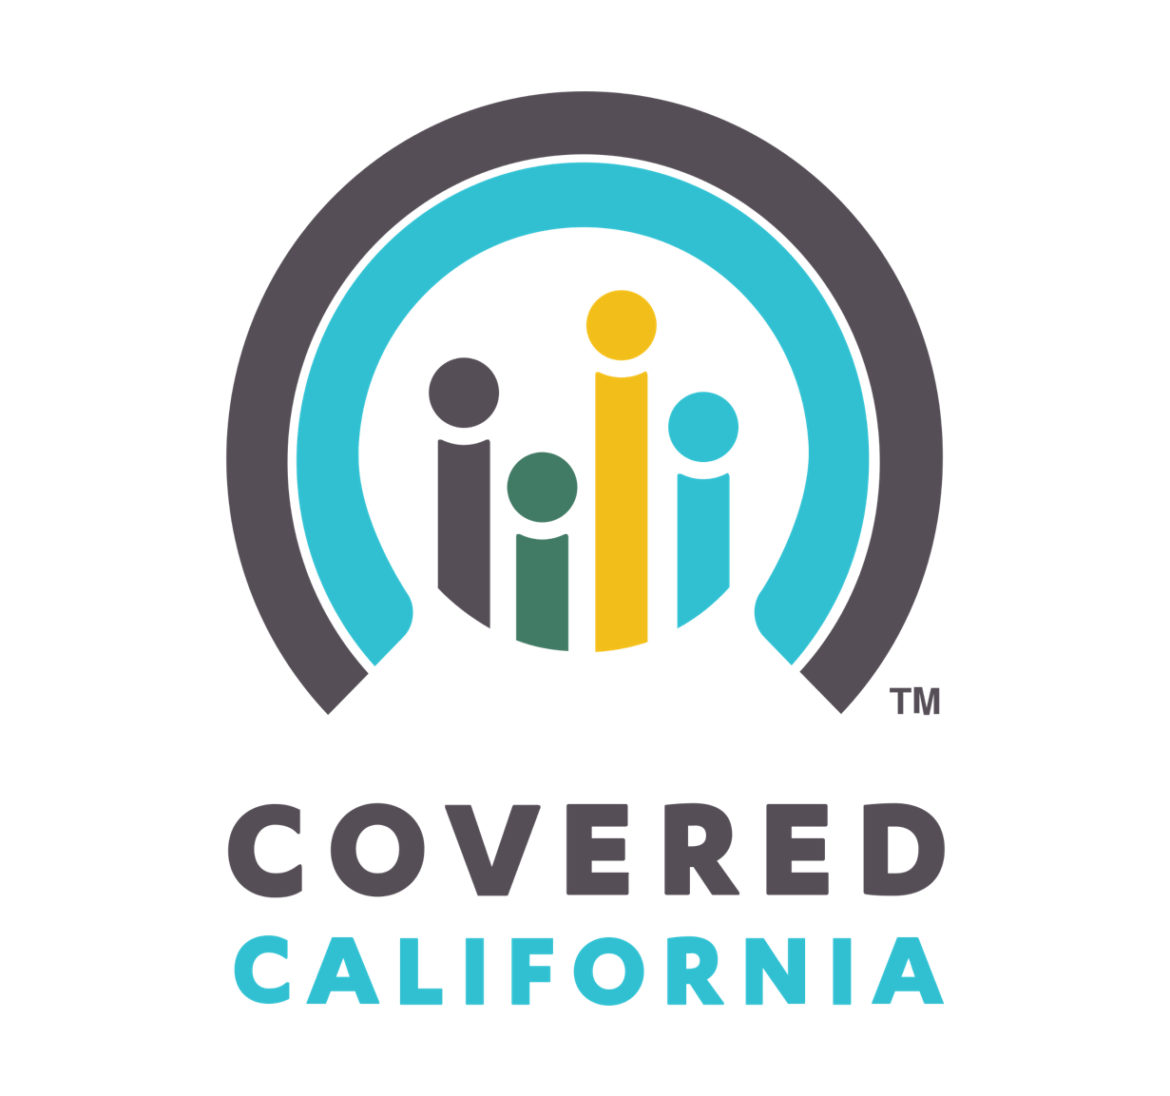 Enrollment in Covered California may be up 20 over last year